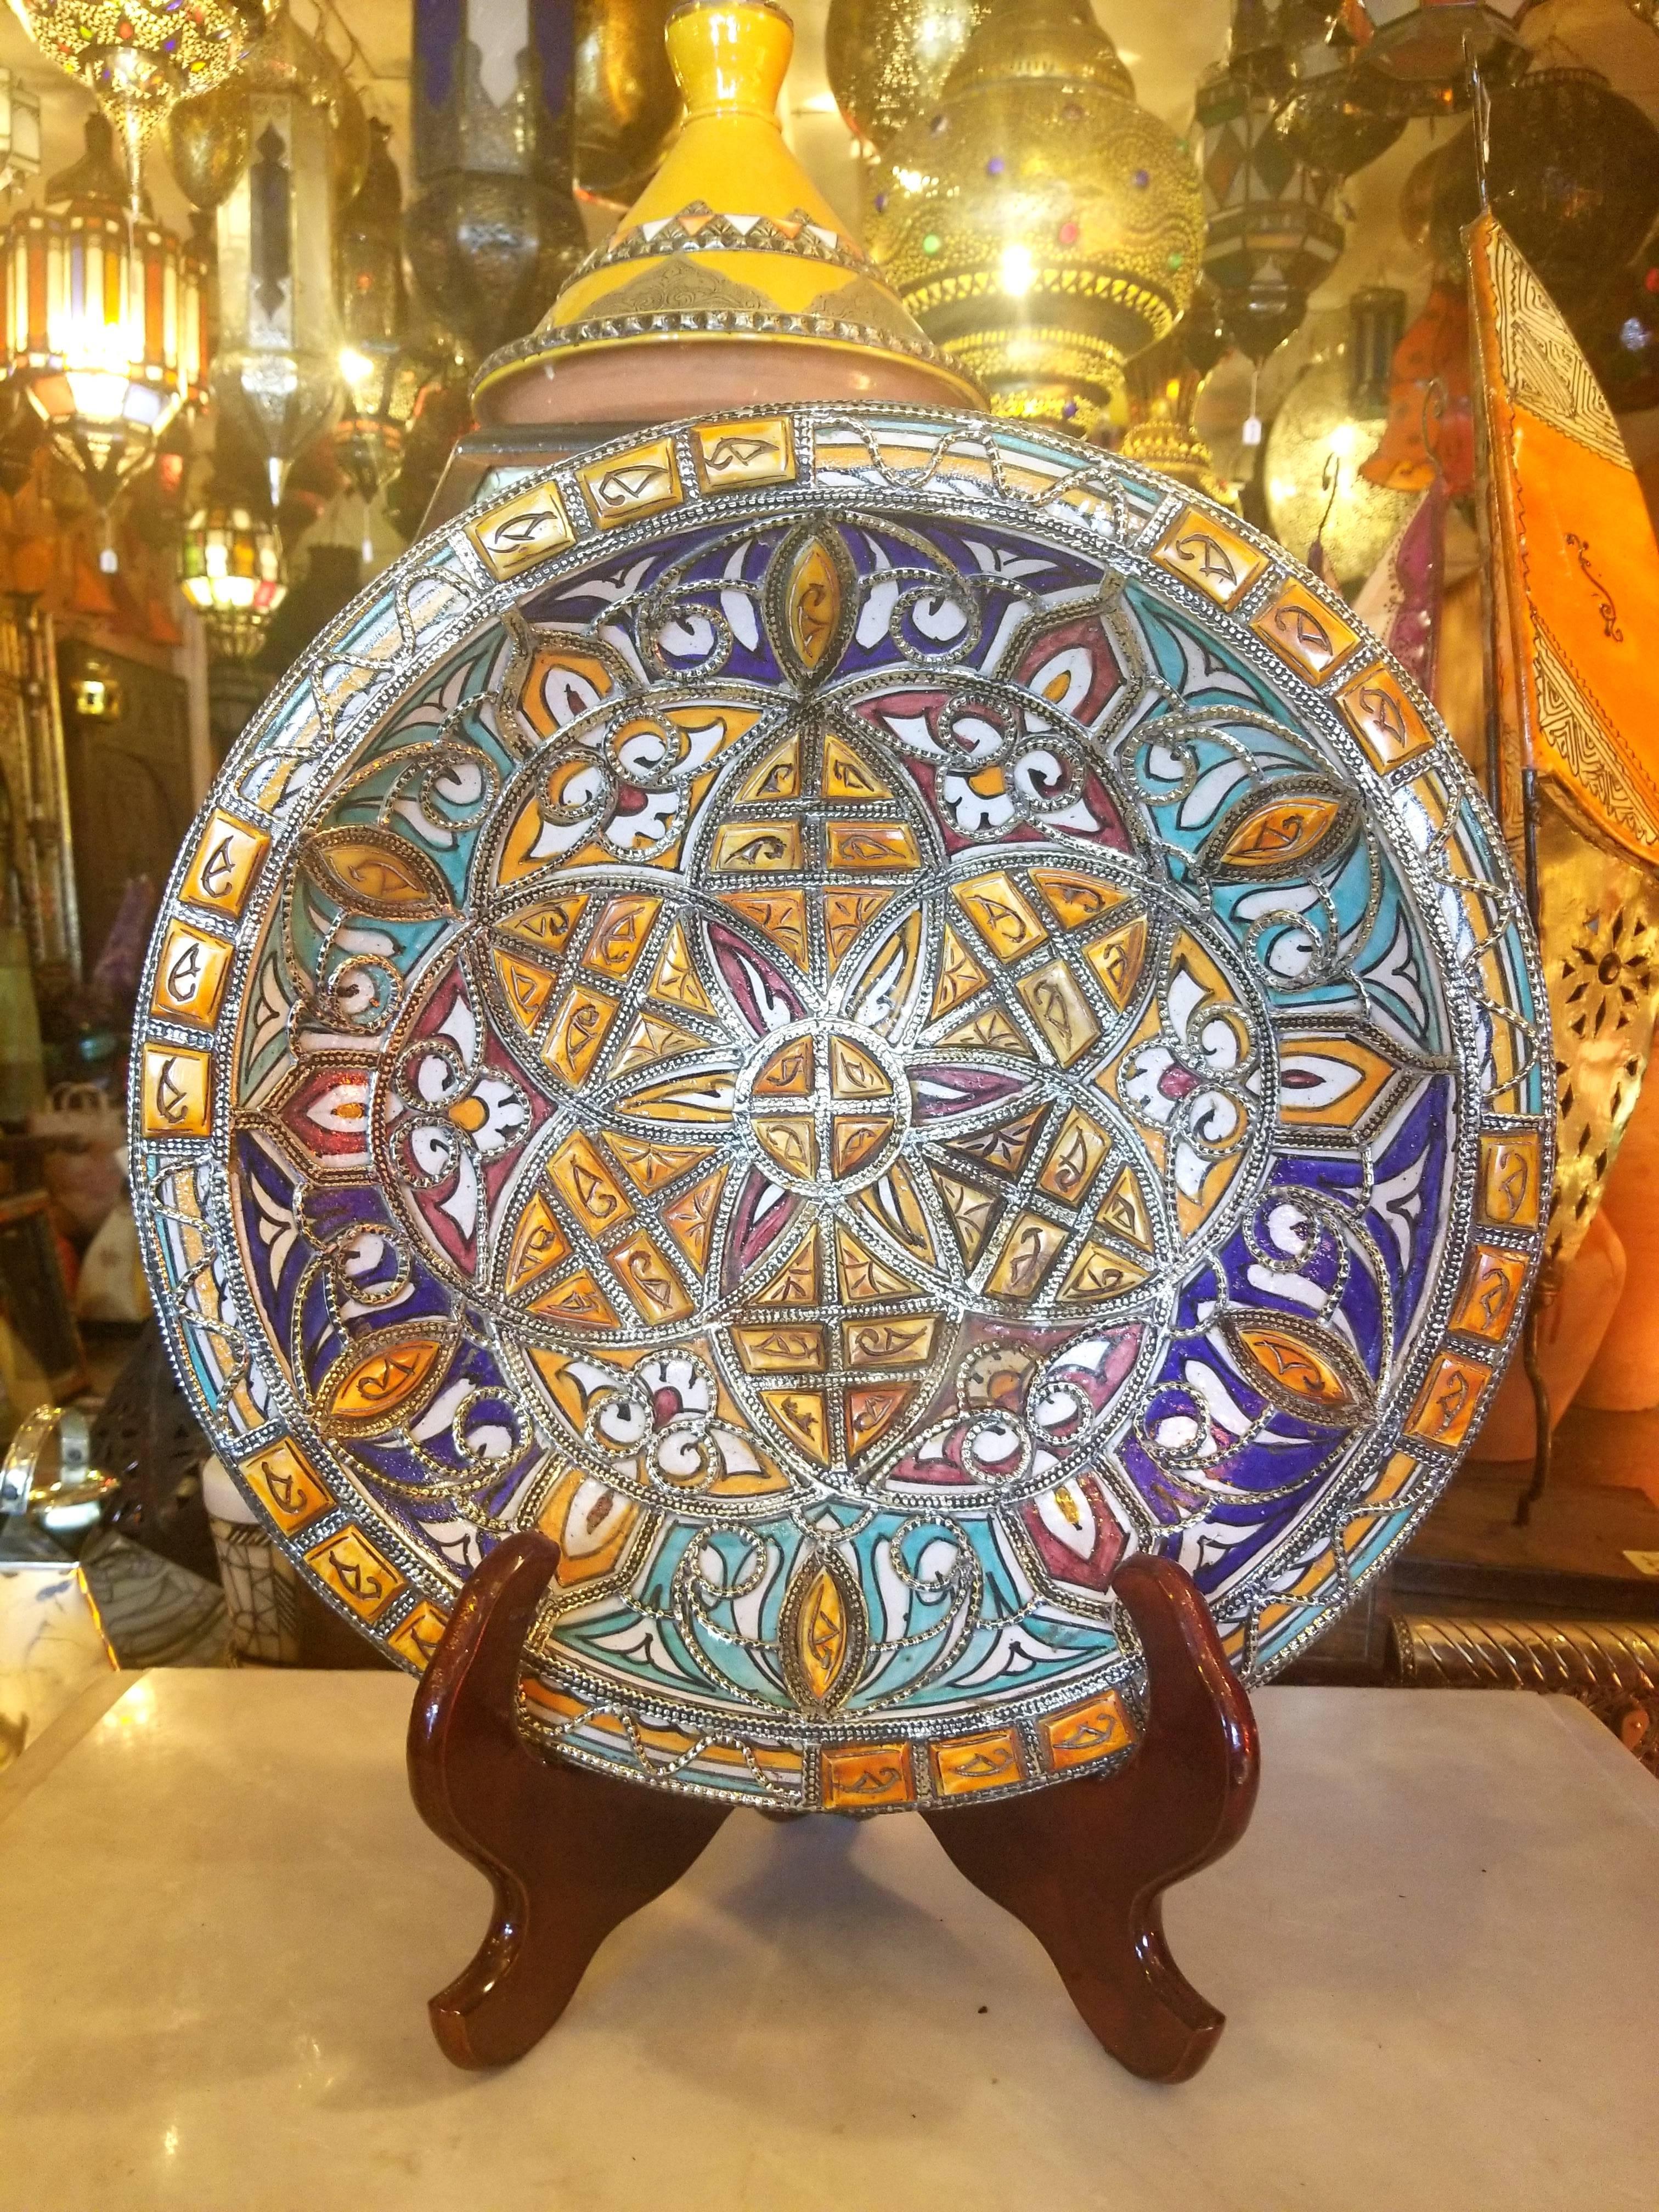 A rare or one of a kind multi-color exquisite Moroccan plate / charger for decoration purpose only. It is hand-painted, and inlaid with metal. Henna dyed Camel bone fragments throughout. This plate would be a great add-on to any decor. Great